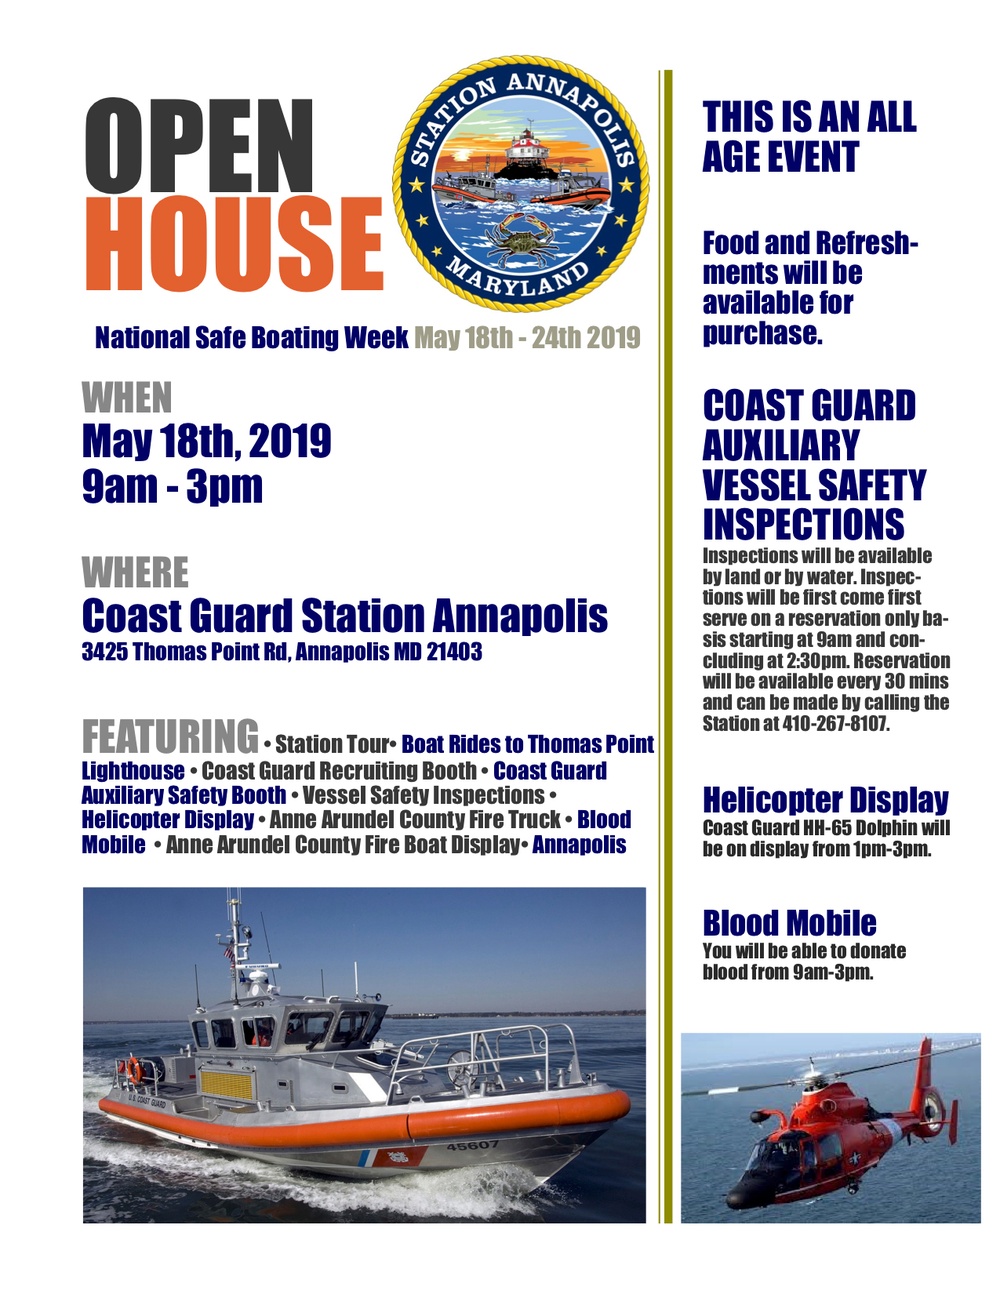 Coast Guard hosts interactive open house, Annapolis, Md.